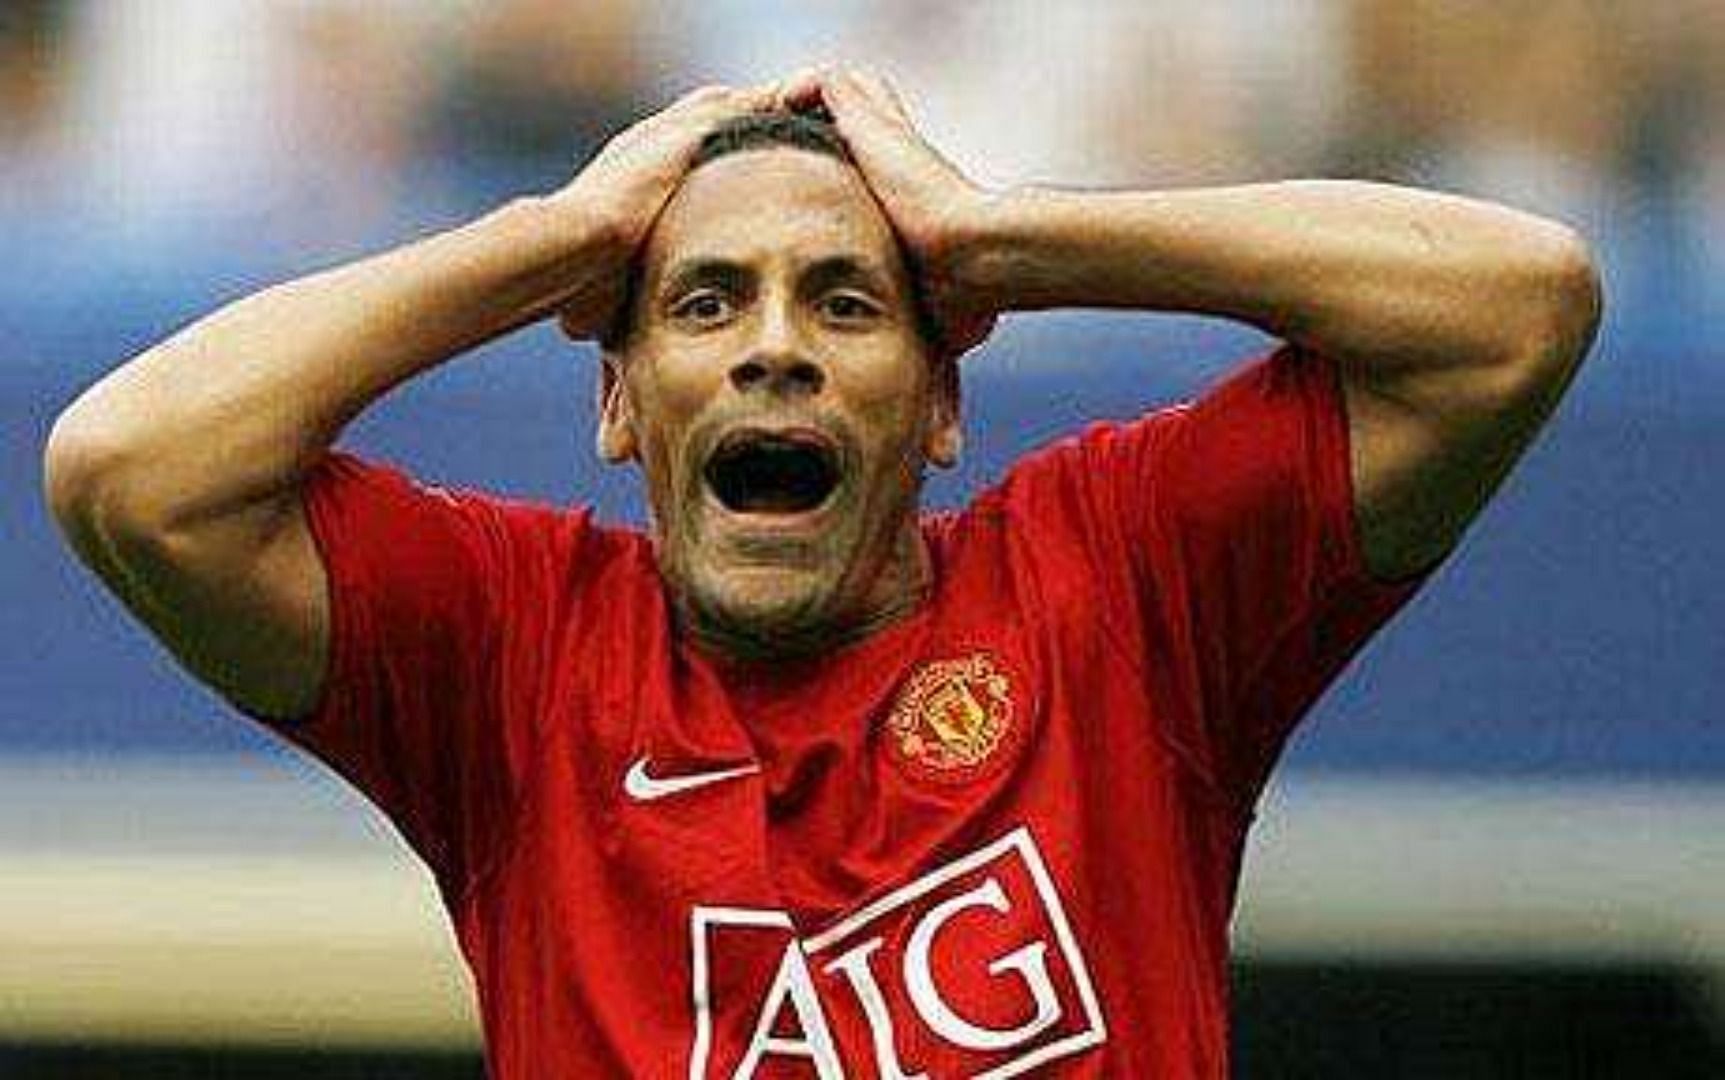 Rio Ferdinand received an eight-month ban for missing a drug test in 2003.